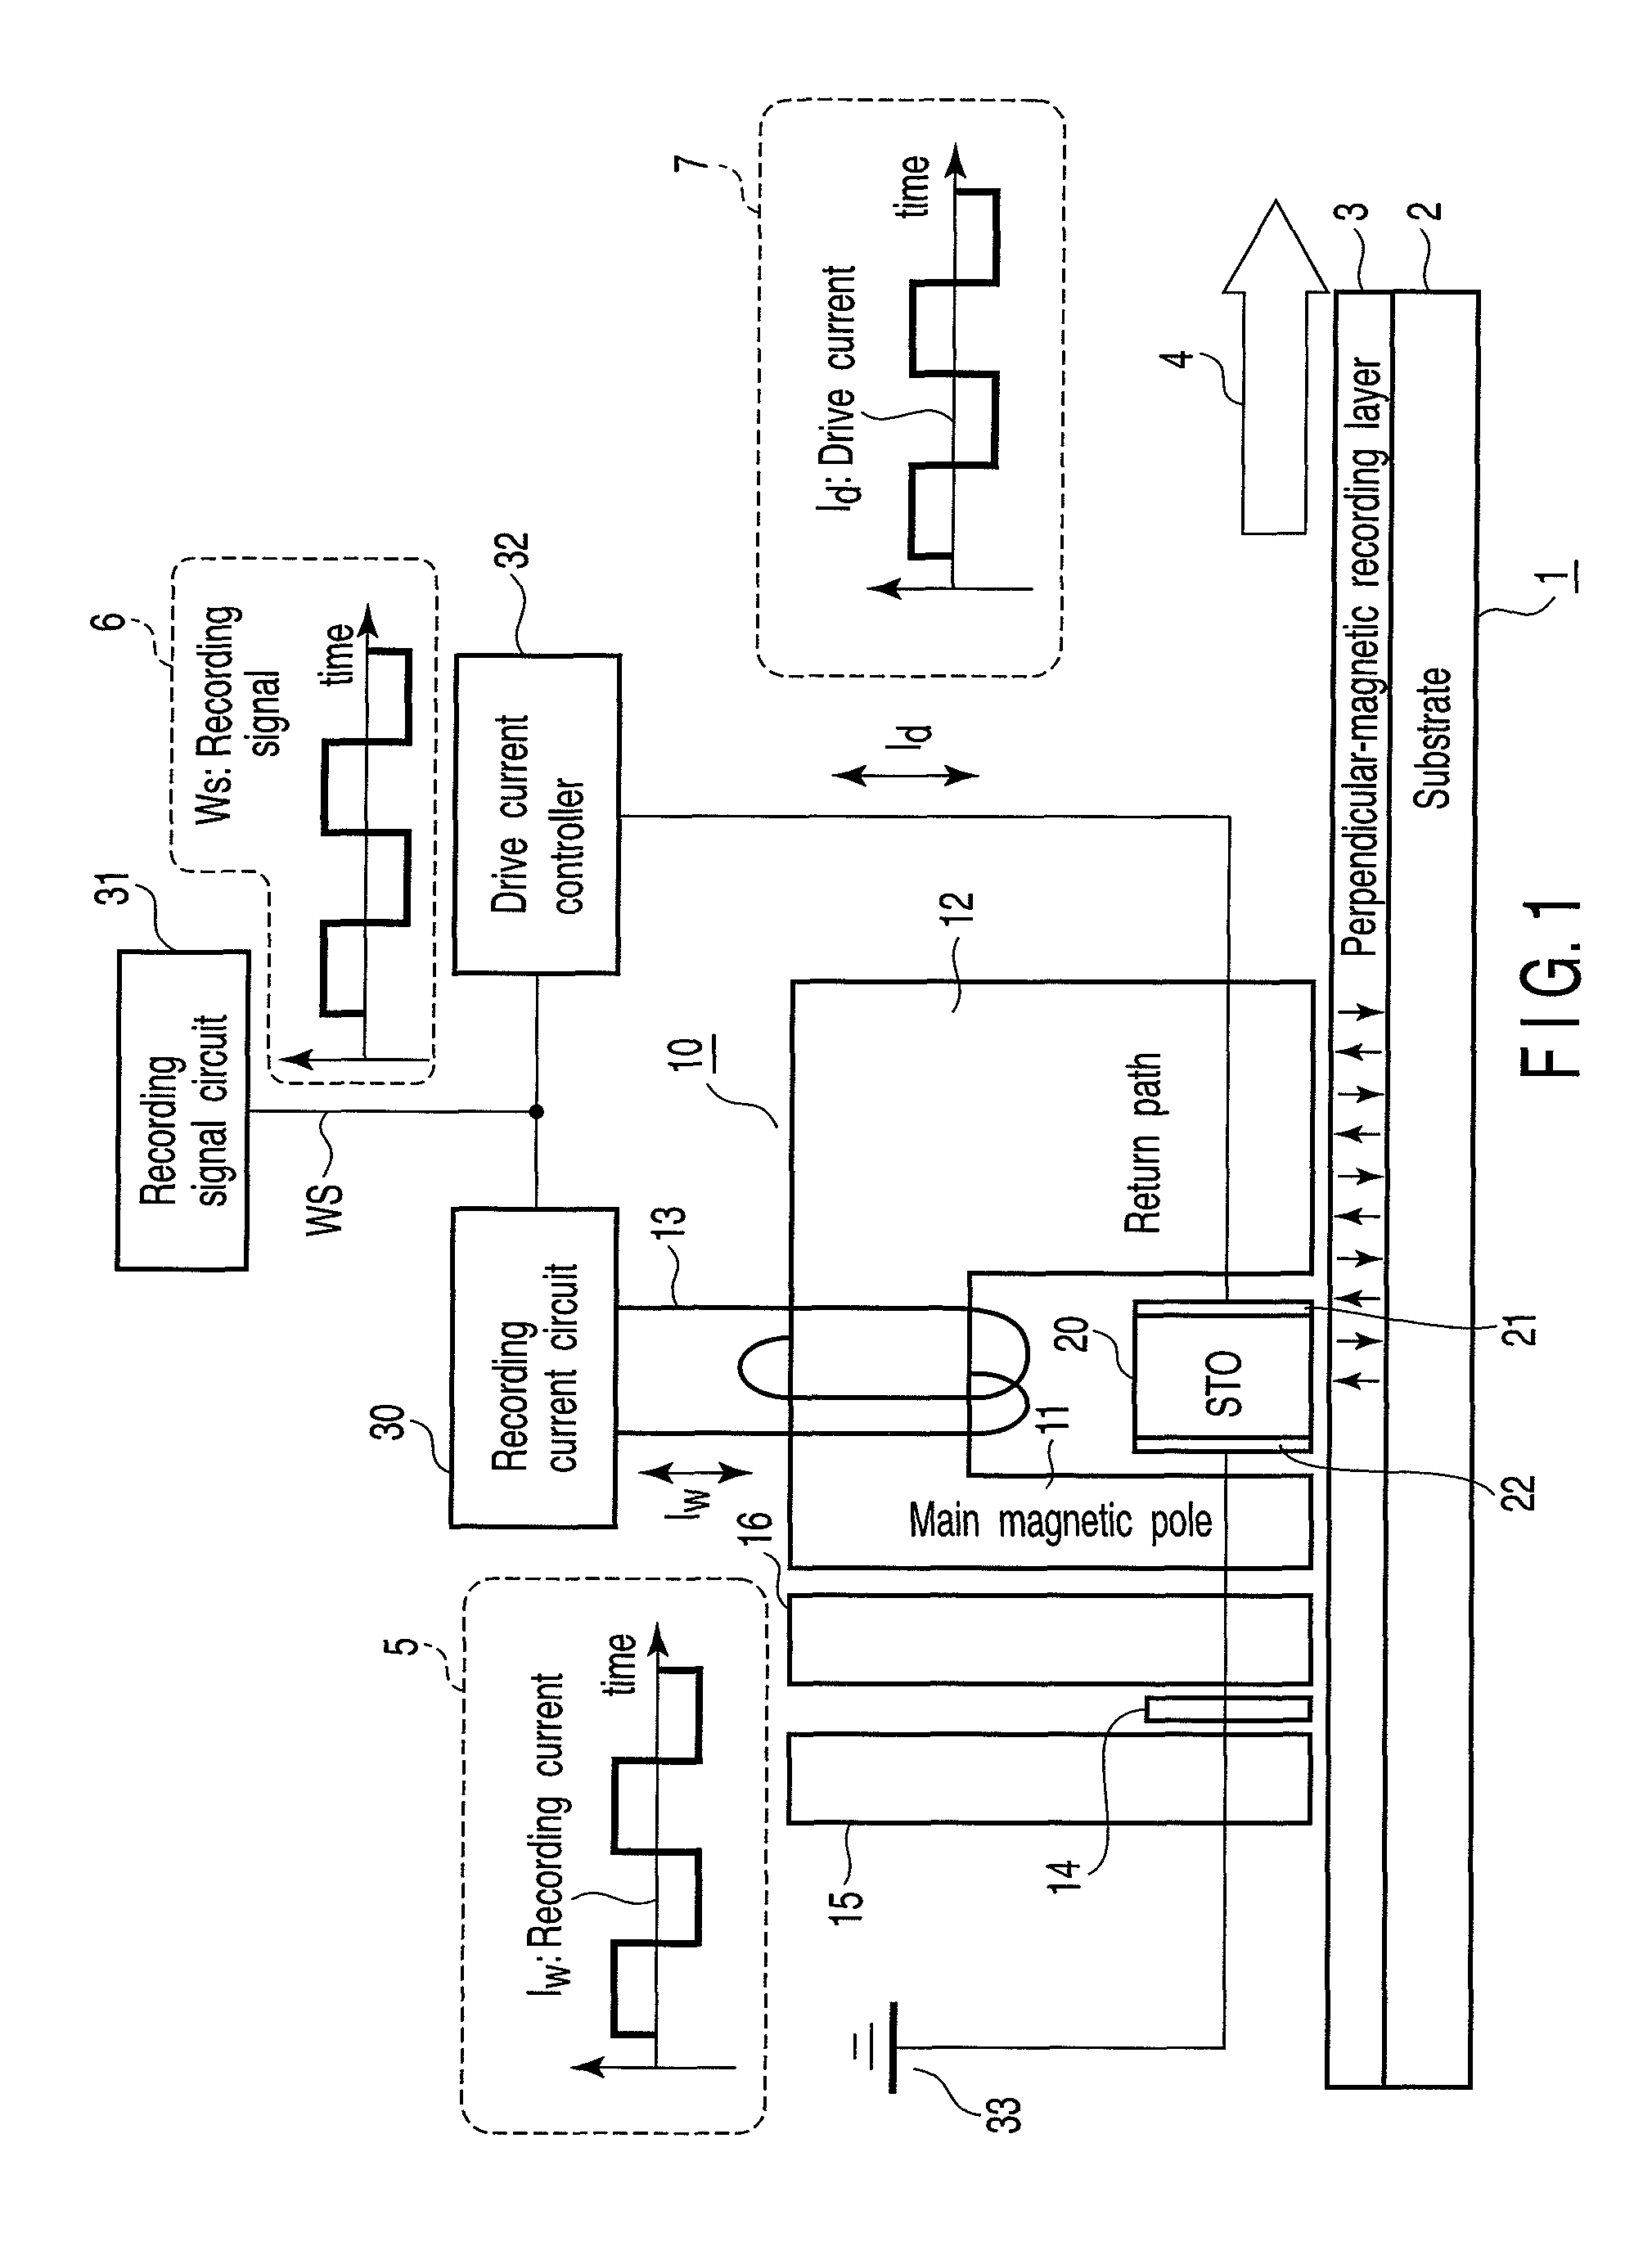 Apparatus for assisting write operation using high frequency magnetic field in disk drive